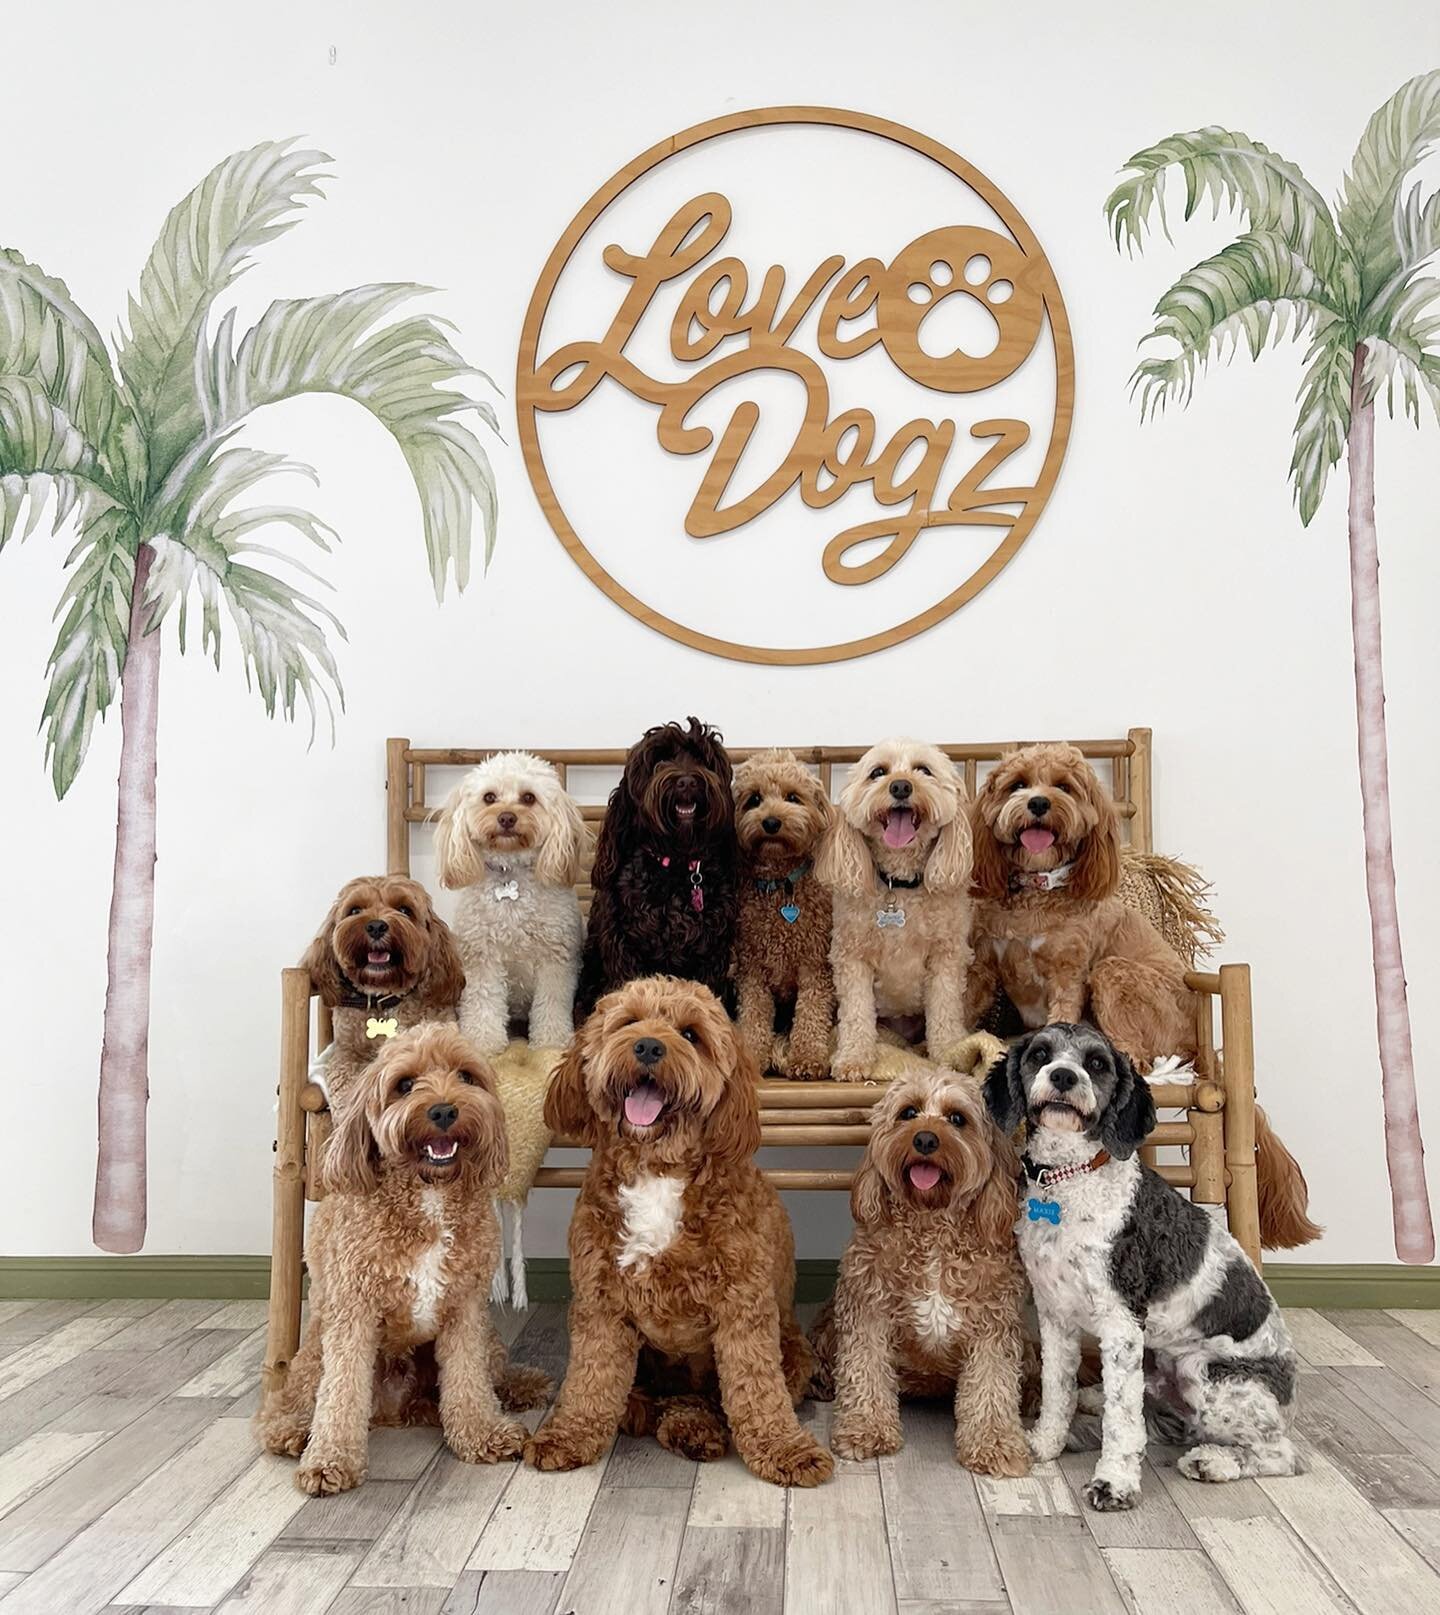 Squad Goals on Oodle day @ Love Dogz 

❤️🐾

Being a boutique home daycare we have limited spaces available.

🔊 exciting news is:

We&rsquo;ve just had some spaces come available.

Please message or give Rach a call if your oodle would like to join 